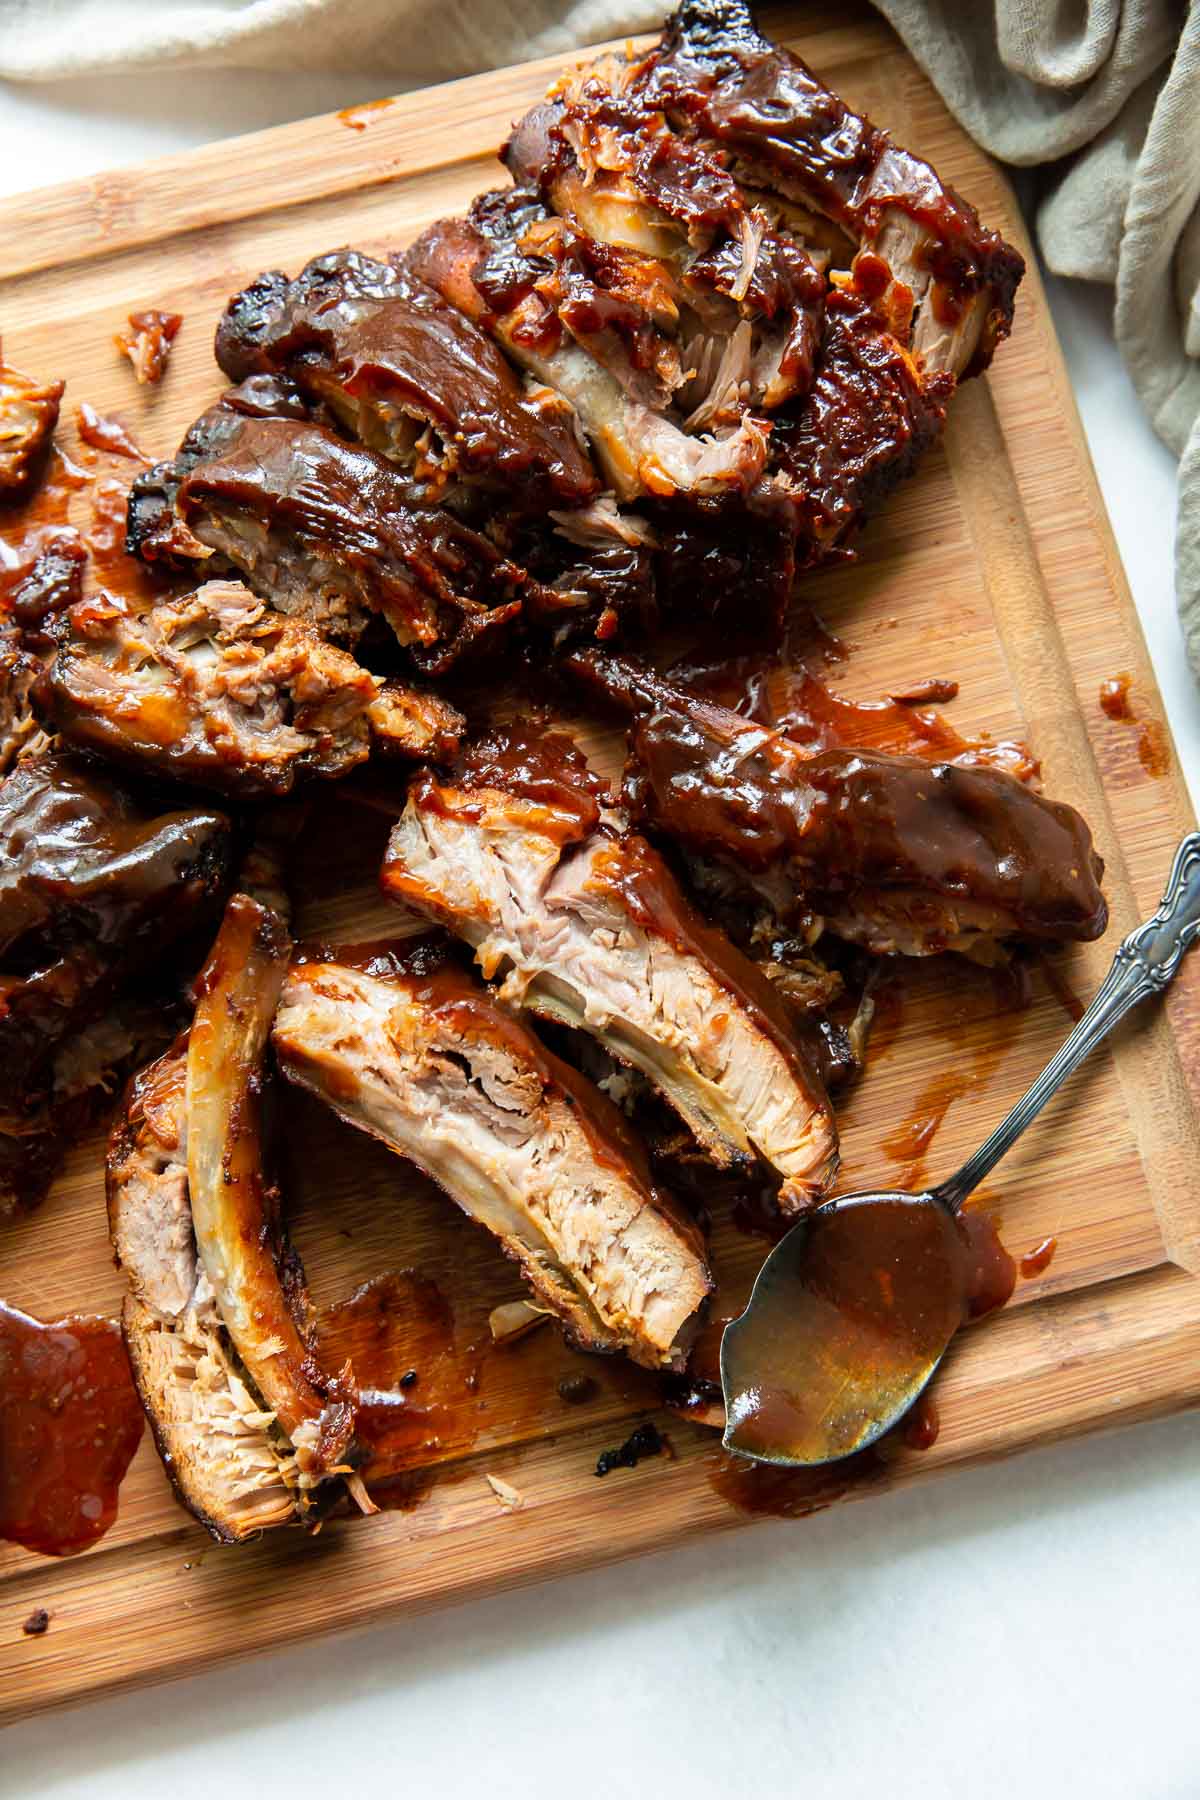 The Best Slow Cooker Ribs - Fall-Off-the-Bone Tender! - Kristine's Kitchen